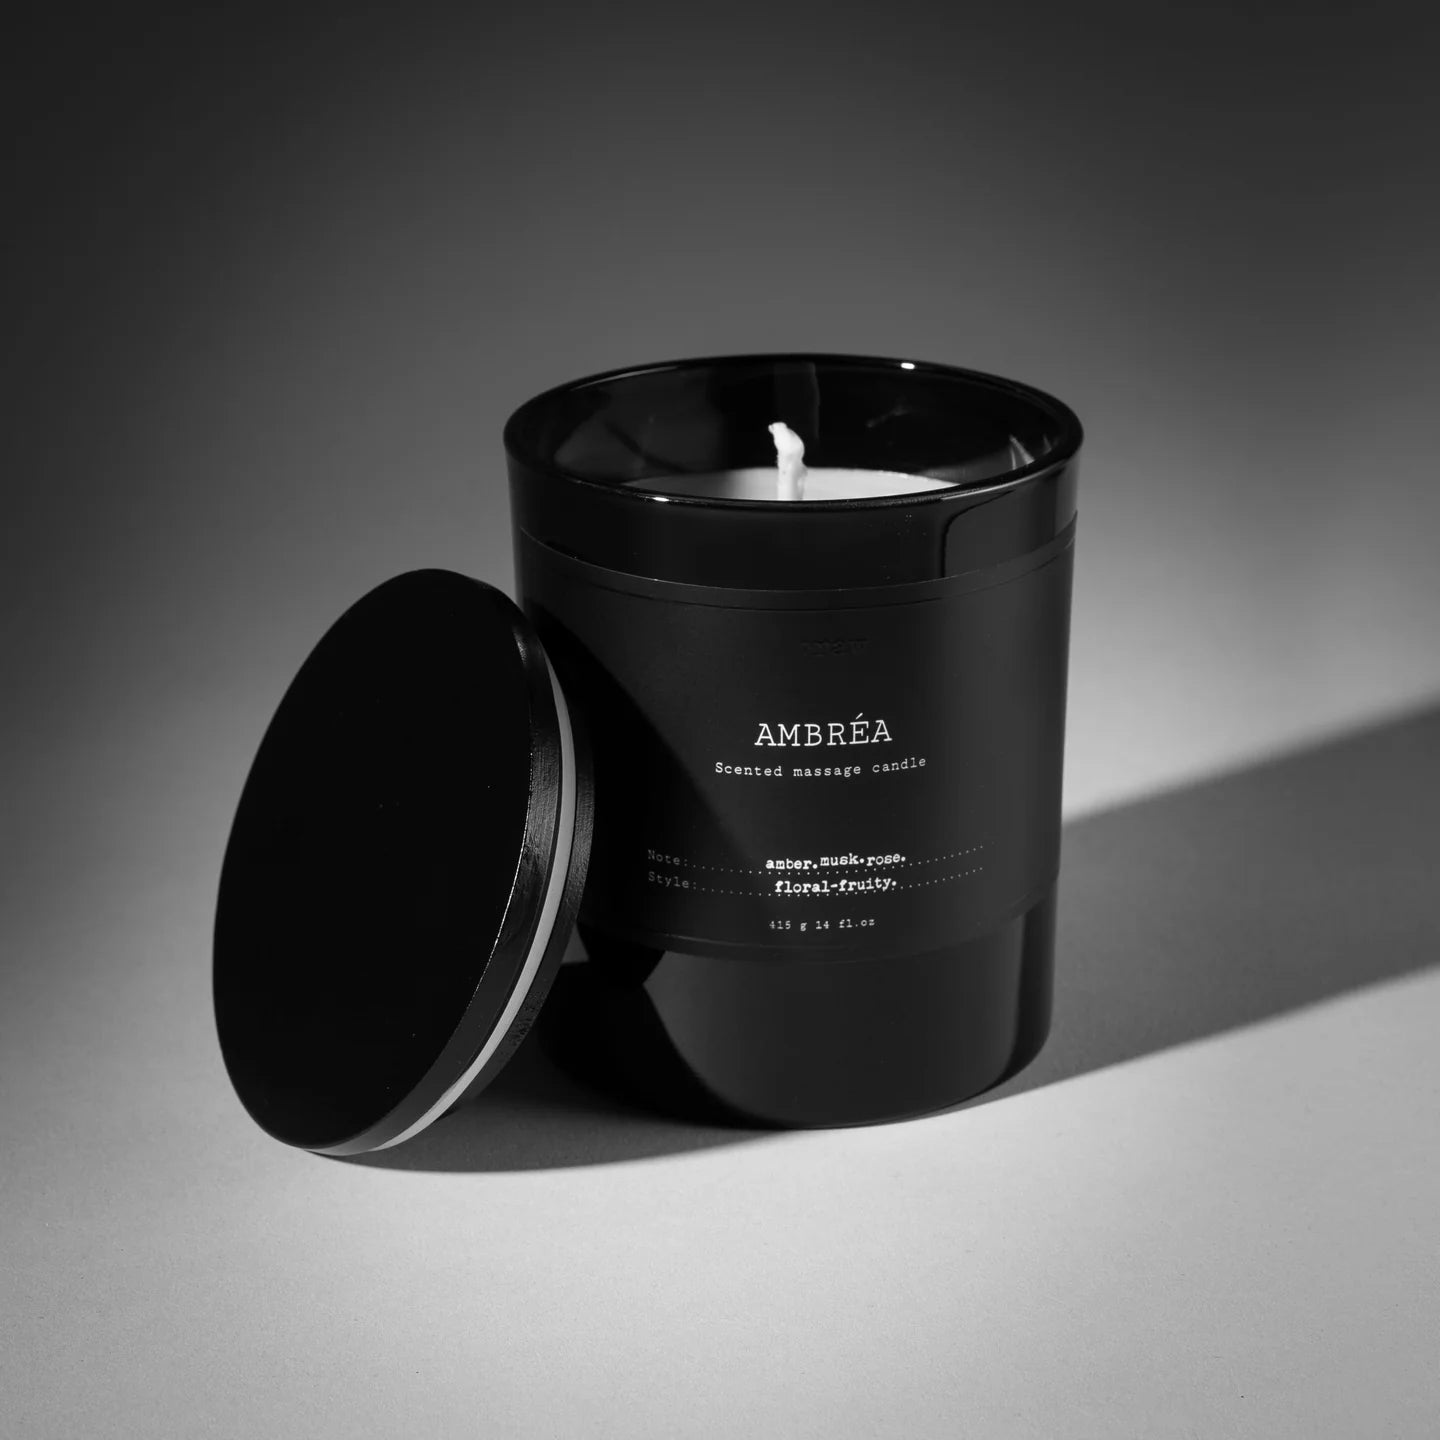 AMBRÉA SCENTED MASSAGE CANDLE